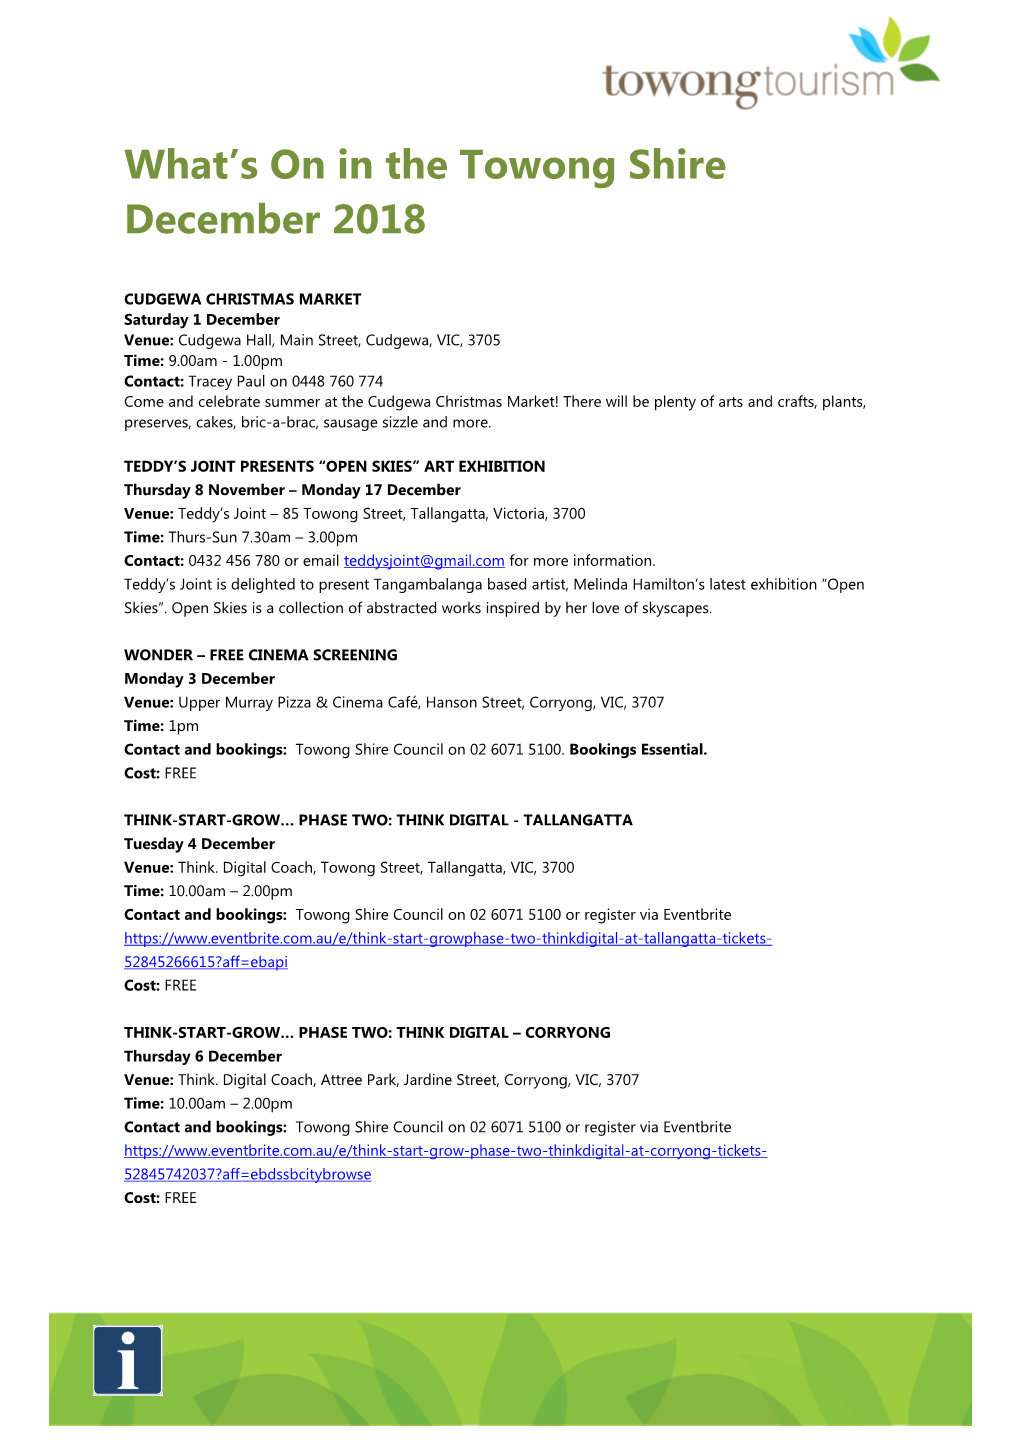 What's on in the Towong Shire December 2018